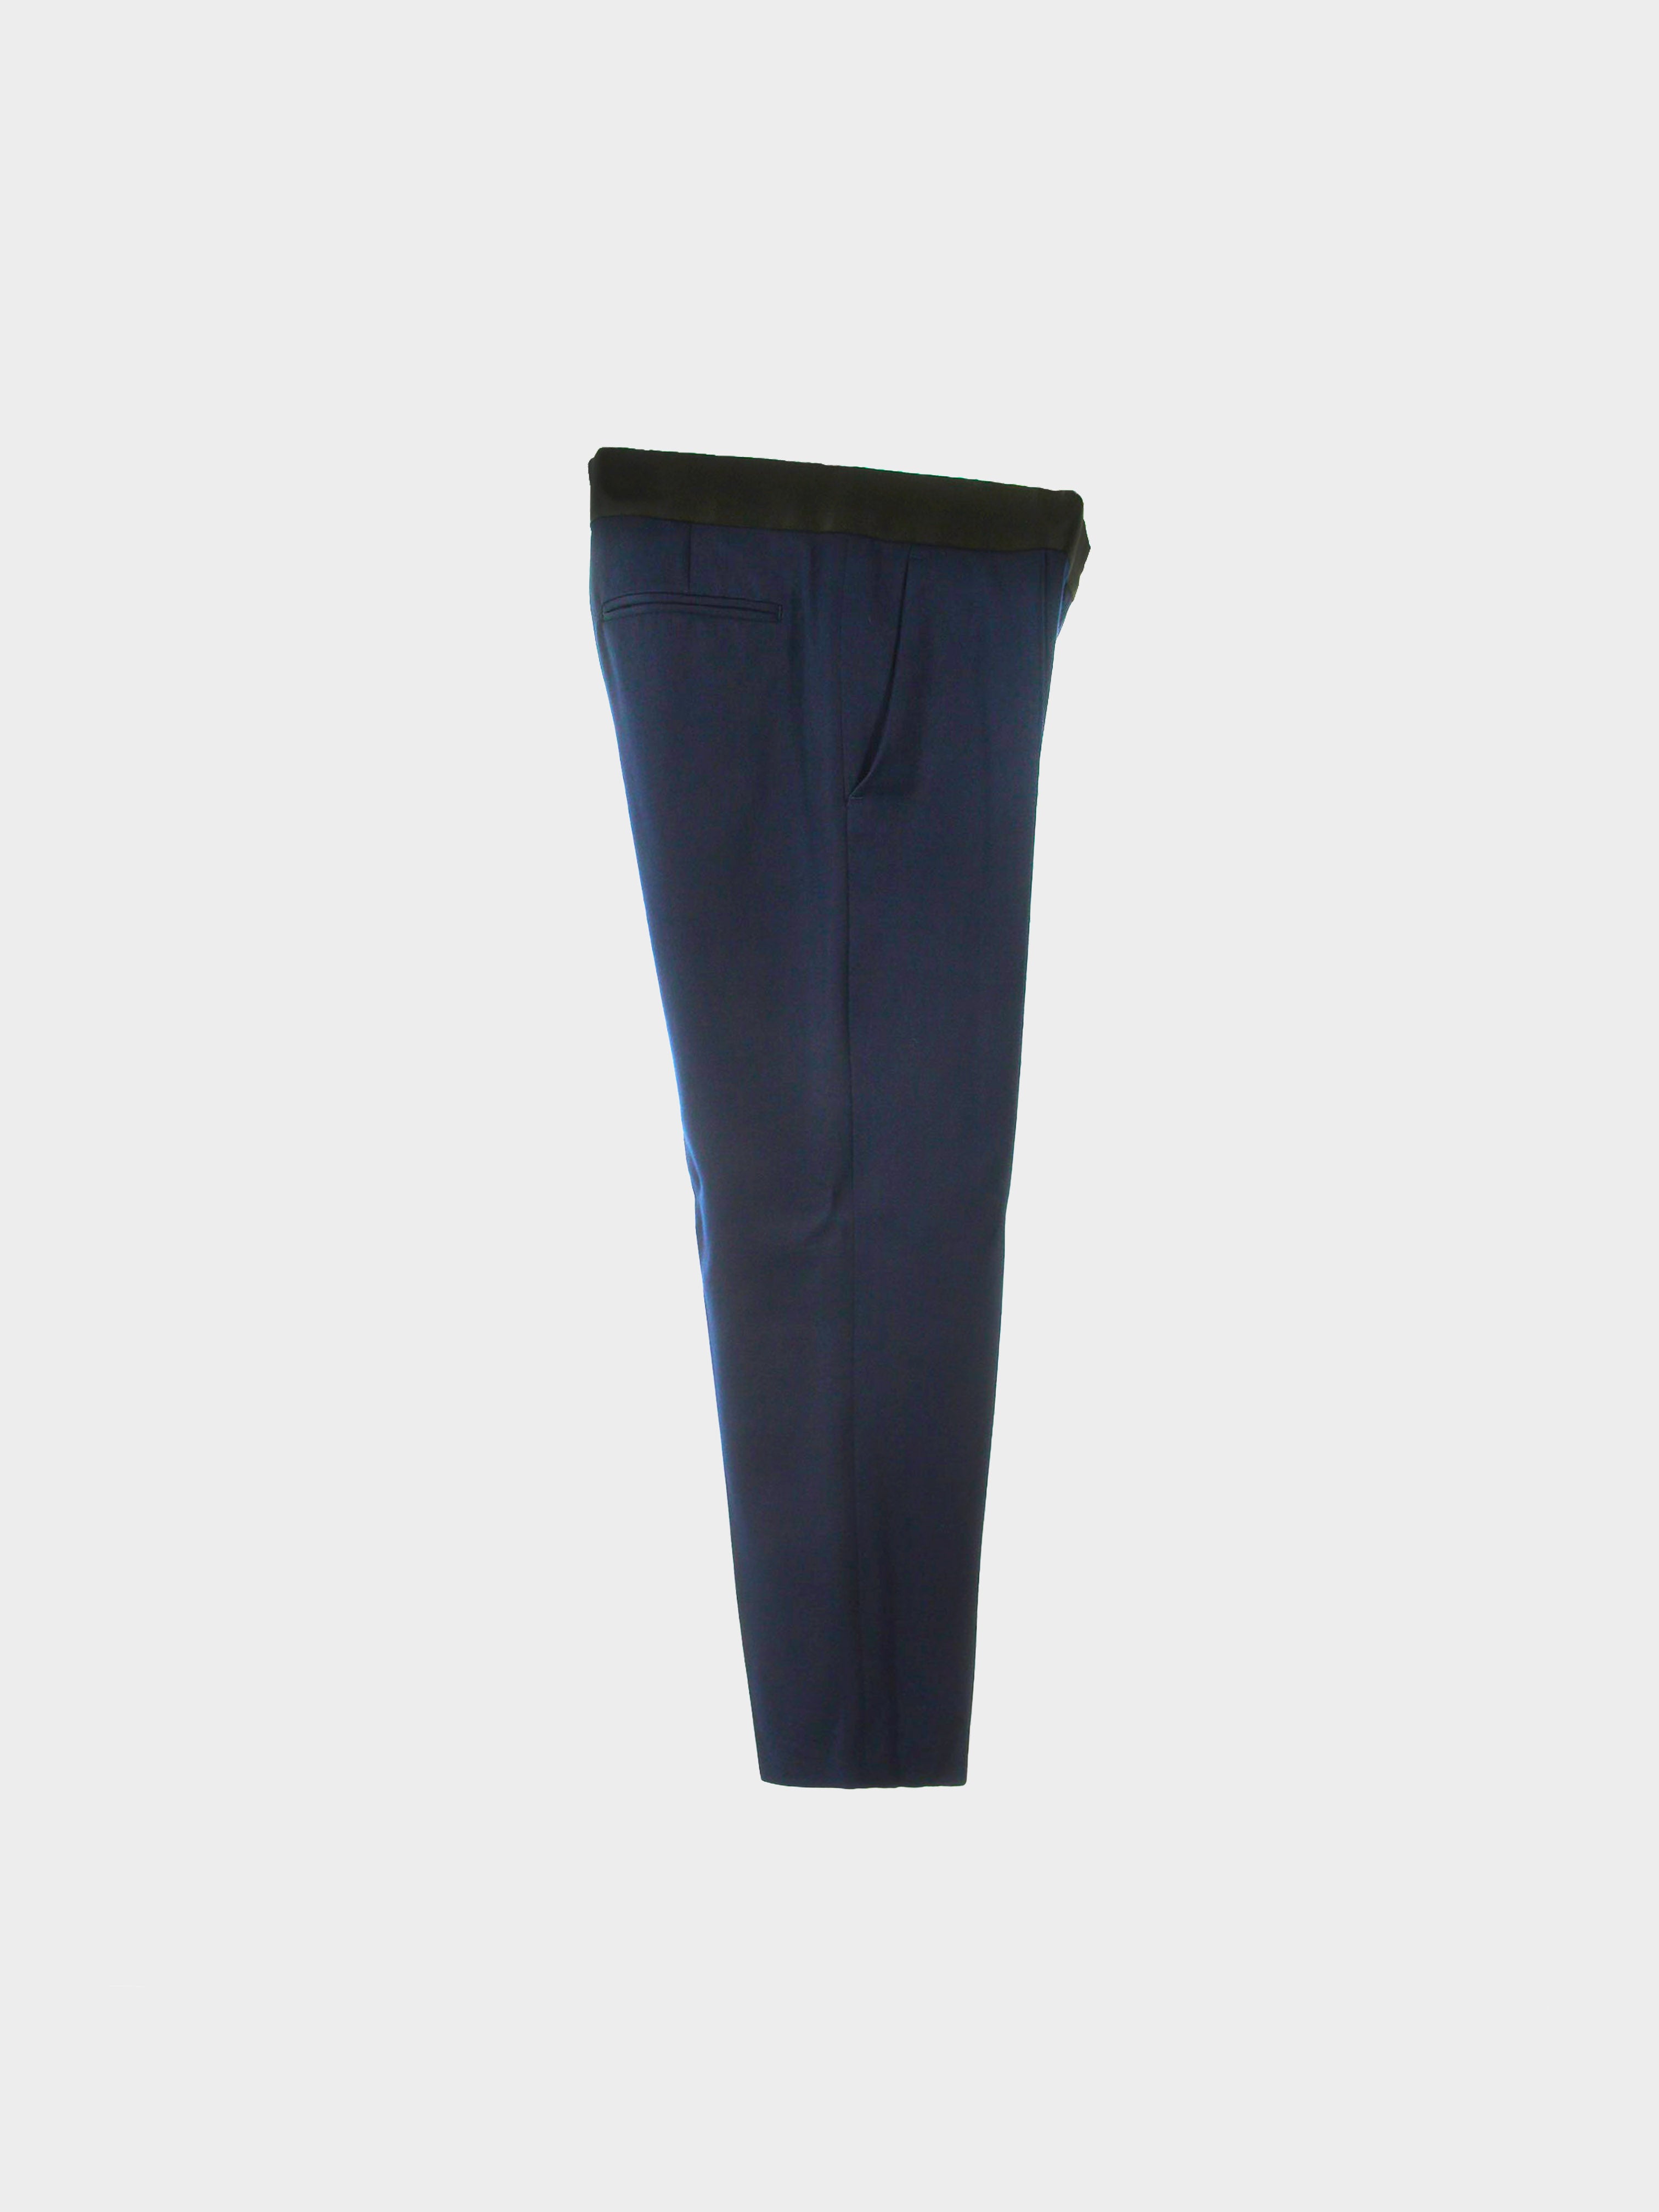 Céline by Phoebe Philo 2000s Navy Blue Stovepipe Trousers